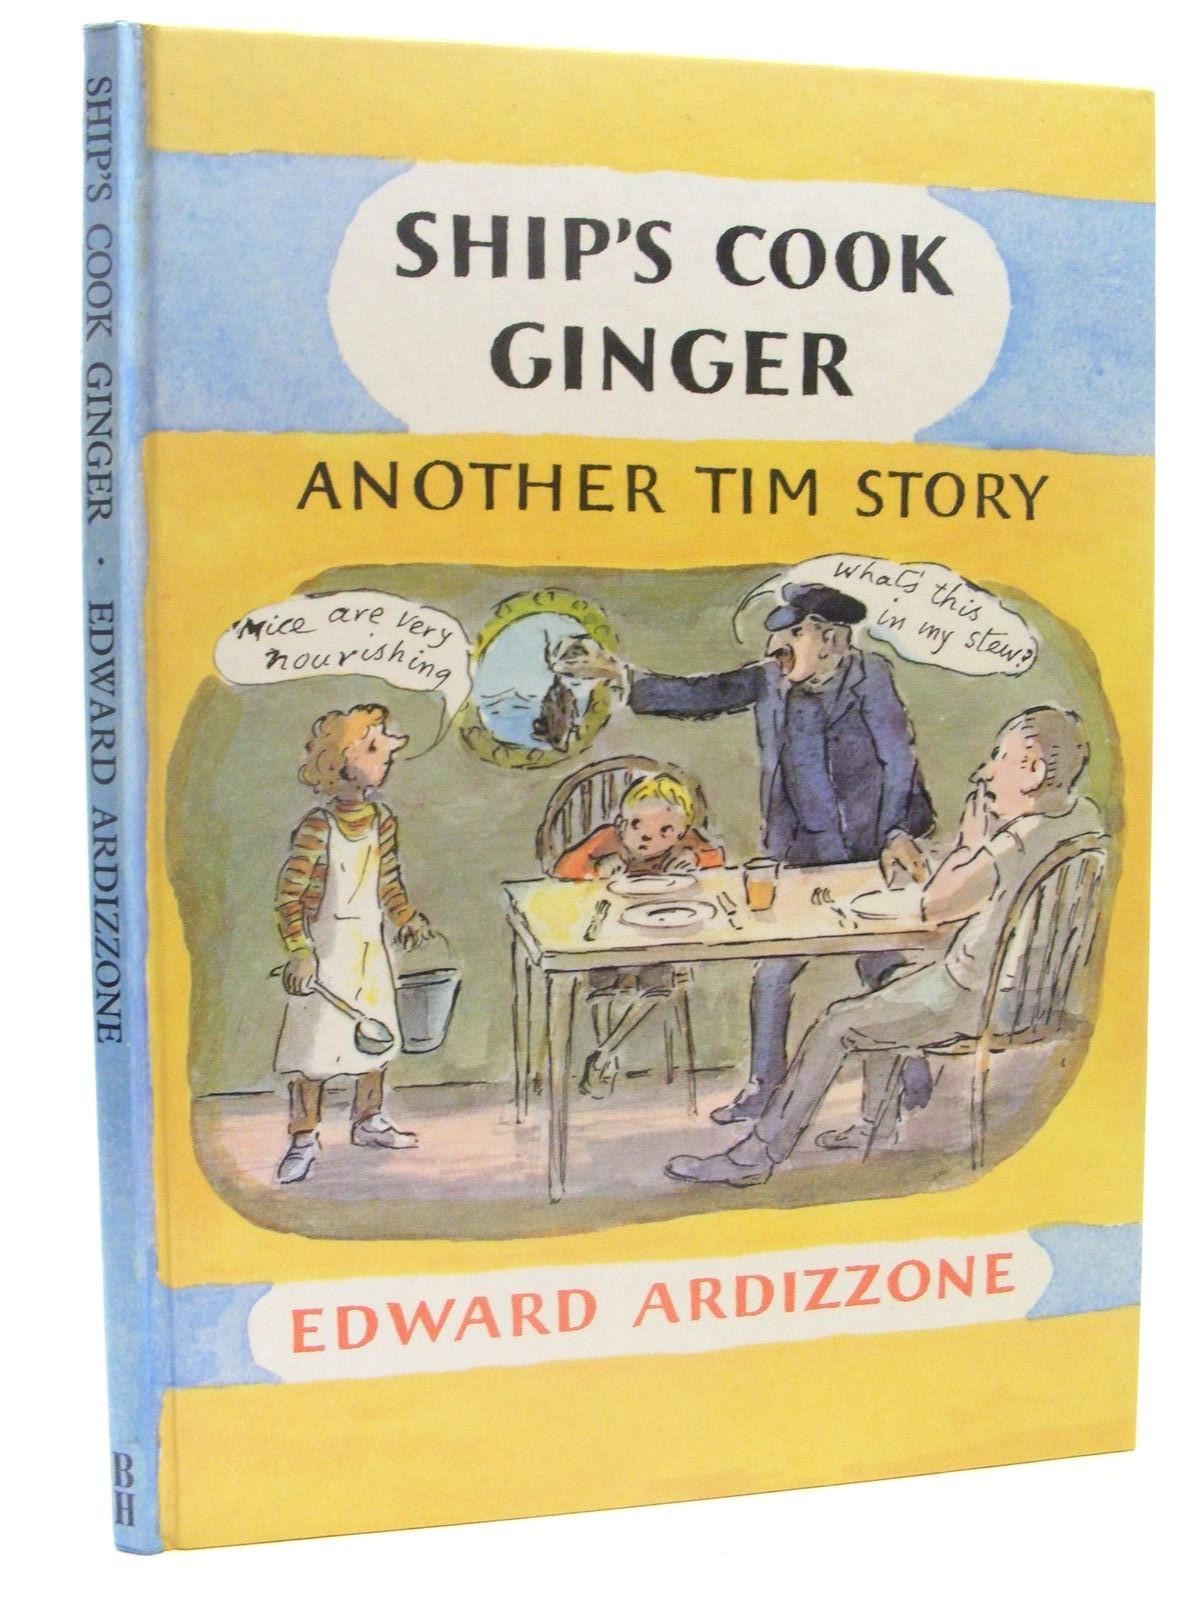 Cover of SHIP'S COOK GINGER by Edward Ardizzone